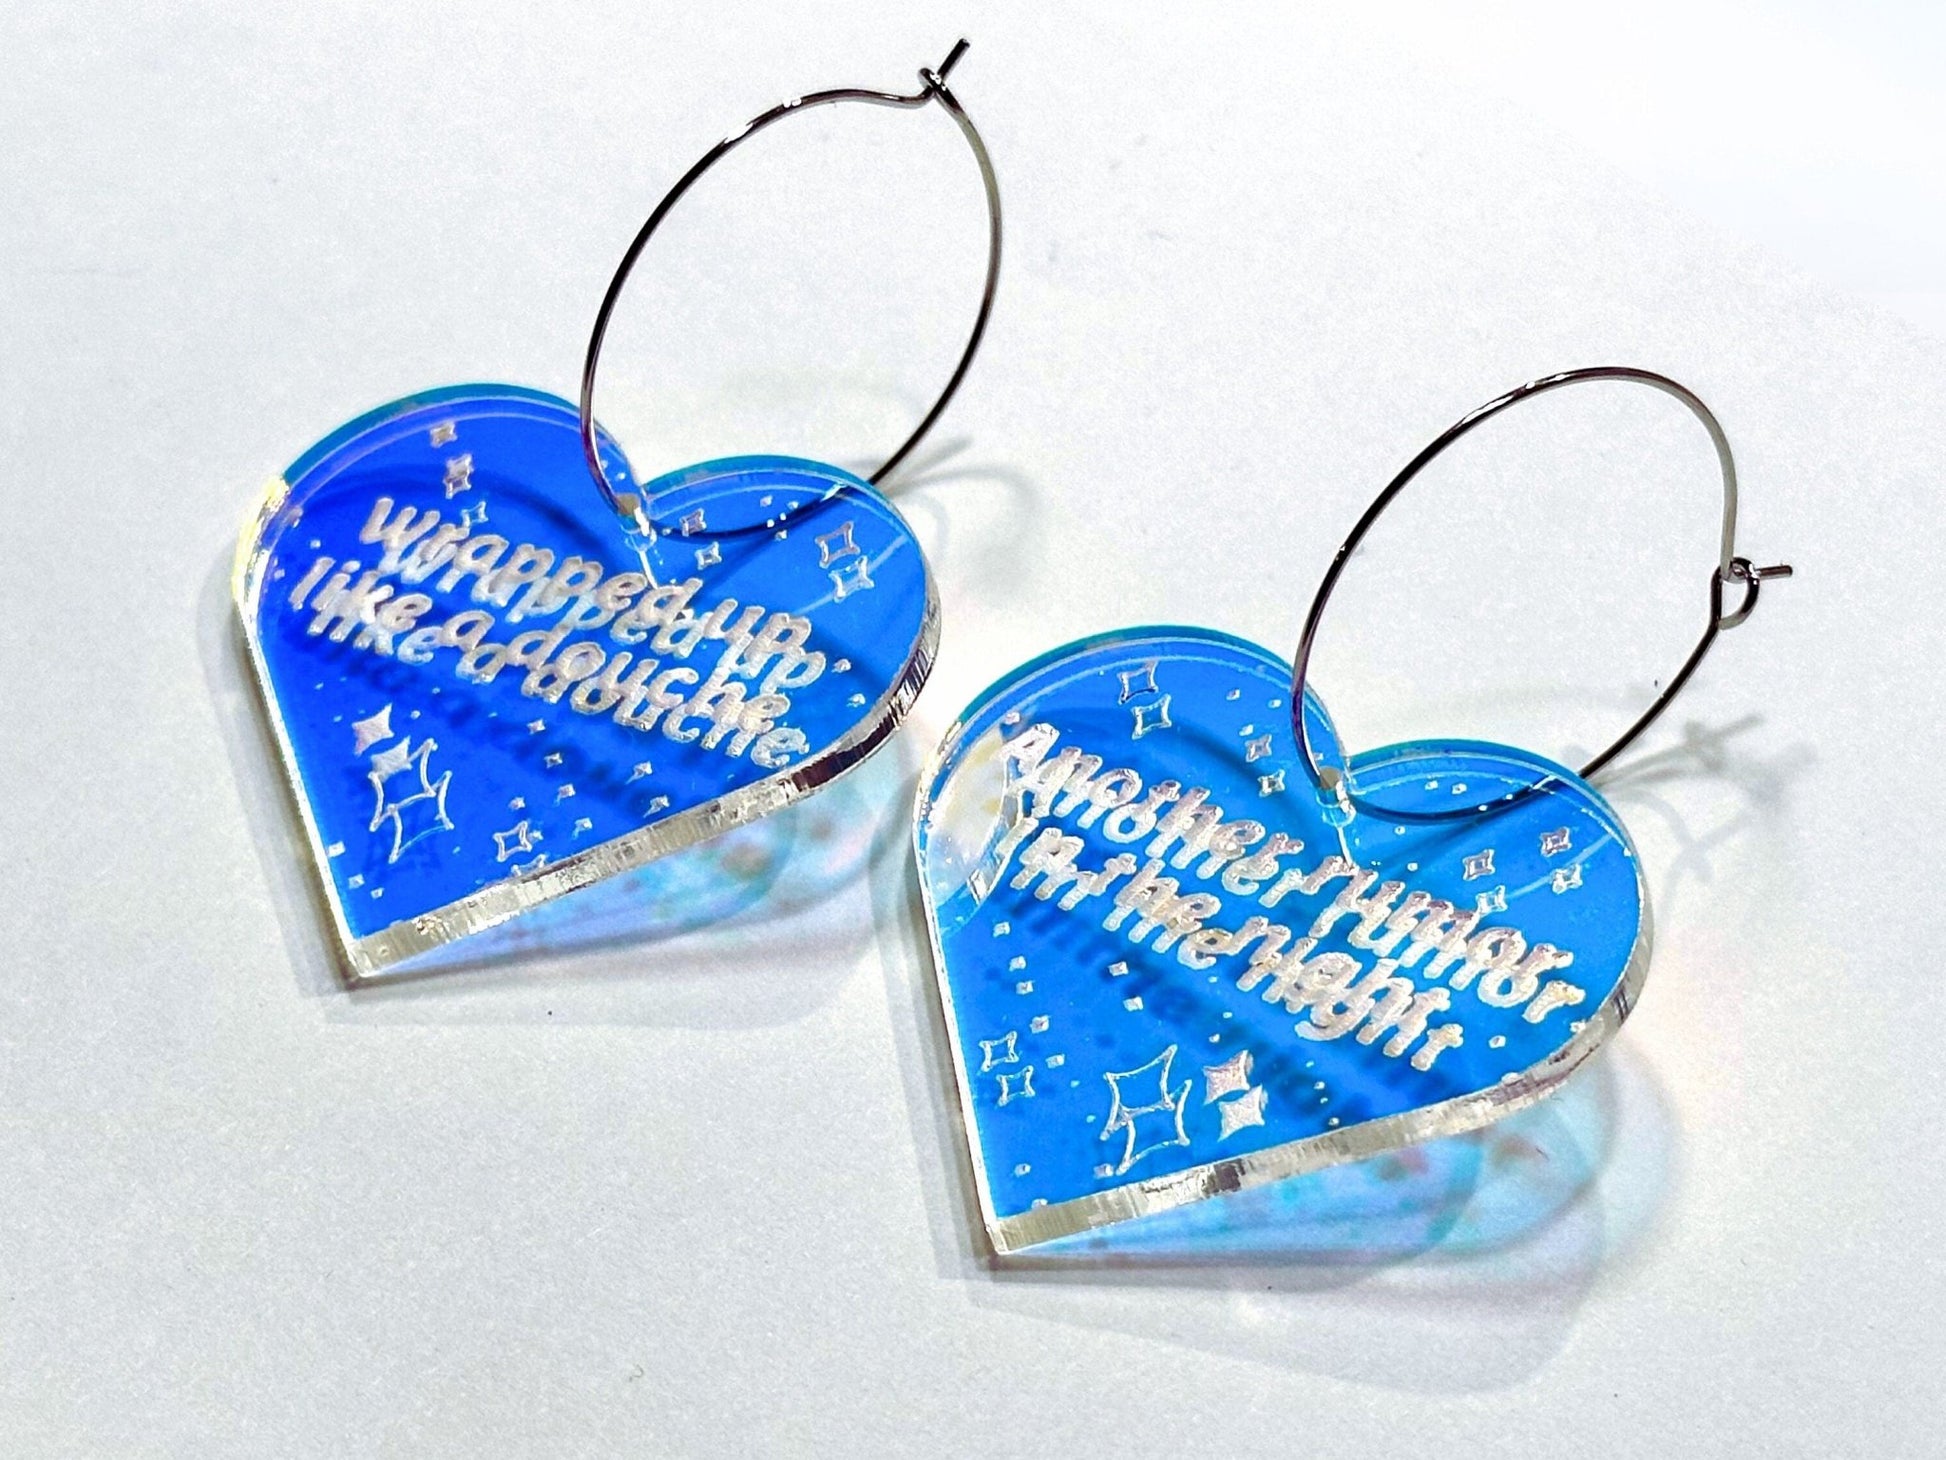 Misheard Lyrics Earrings | Wrapped Up Like A Douche, Another Rumor in the Night - Painted Raina